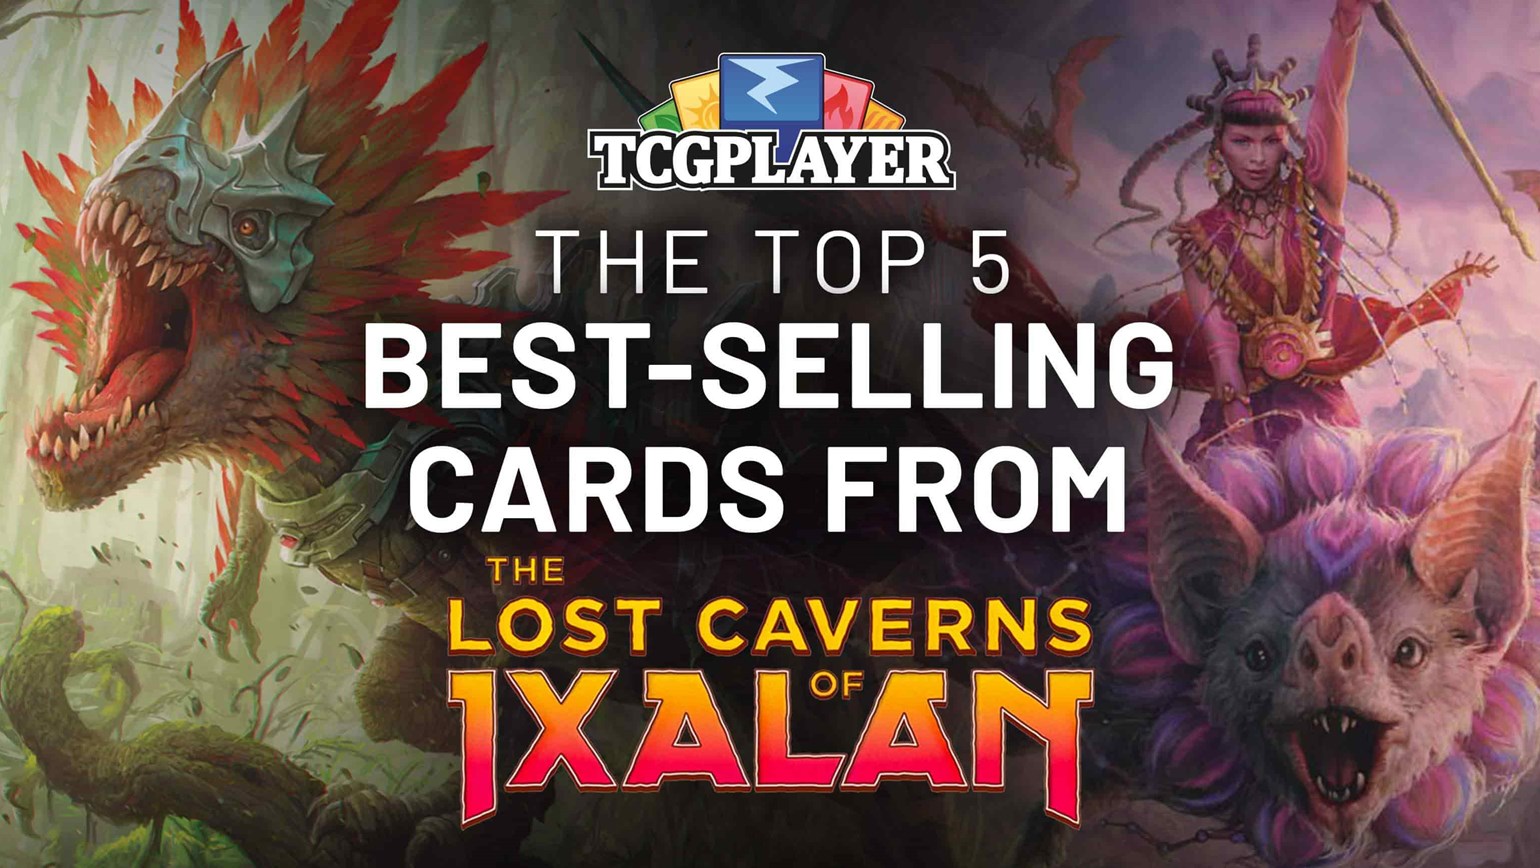 The Top 5 Best-Selling Cards for The Lost Caverns of Ixalan